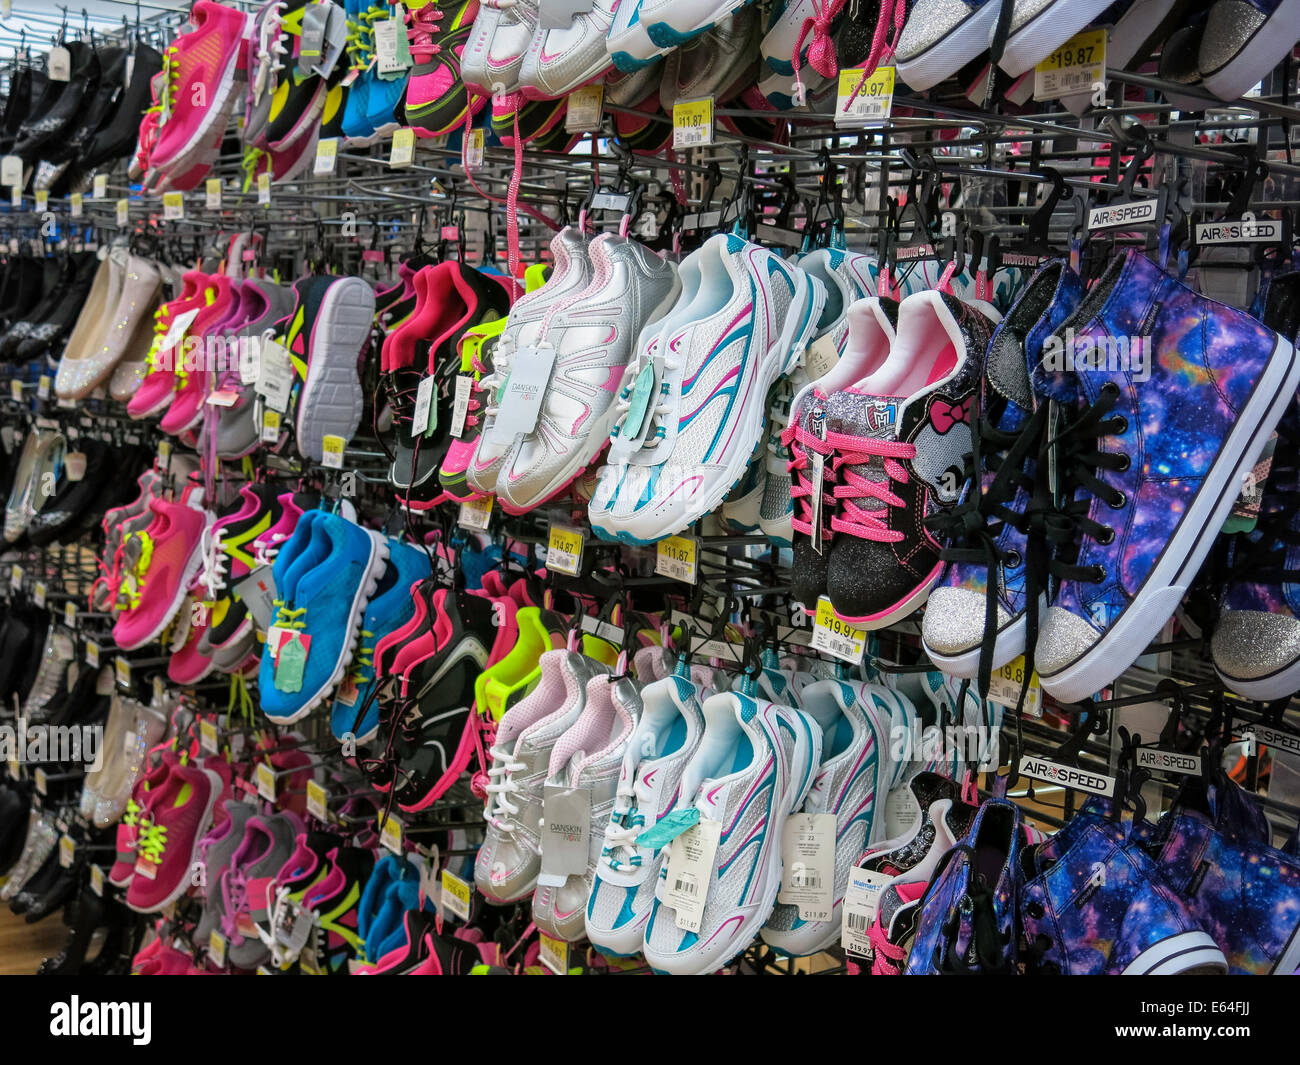 Athletic Shoe Display, Walmart Discount Department Store, USA Stock Photo: 72629498 - Alamy